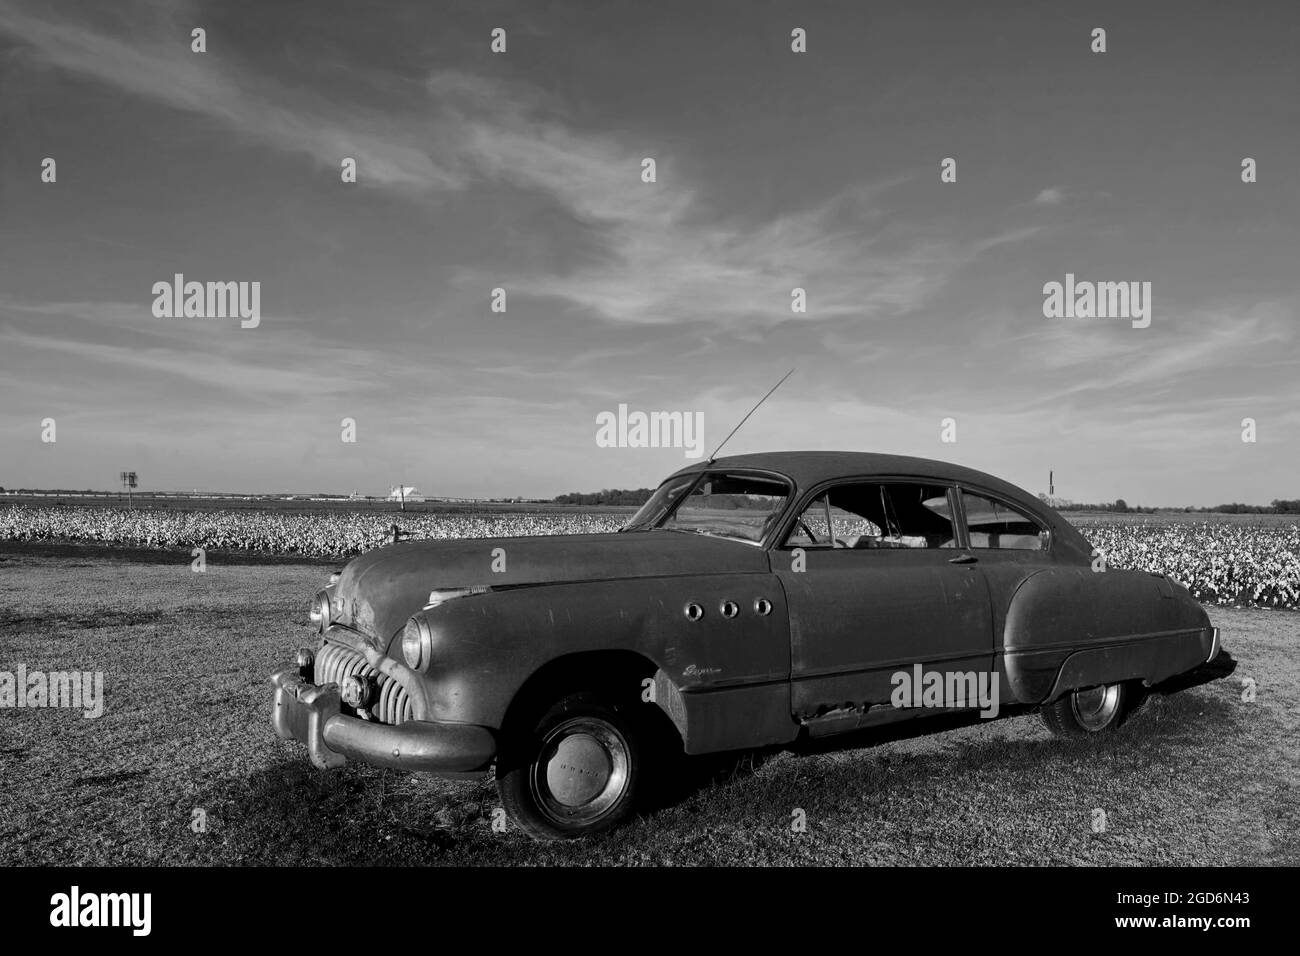 Vintage Buick automobile at the Hopson Plantation site on the outskirts of Clarksdale, USA, US Stock Photo